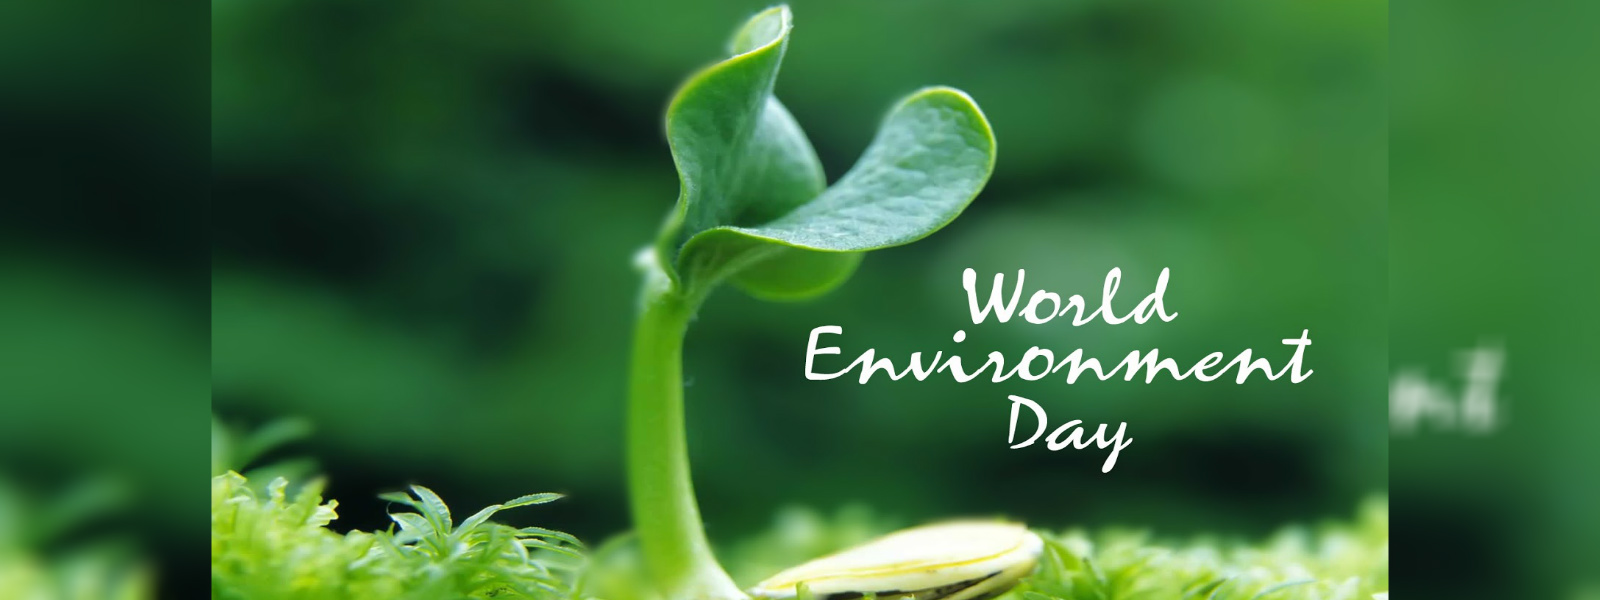 President's message on world environment day